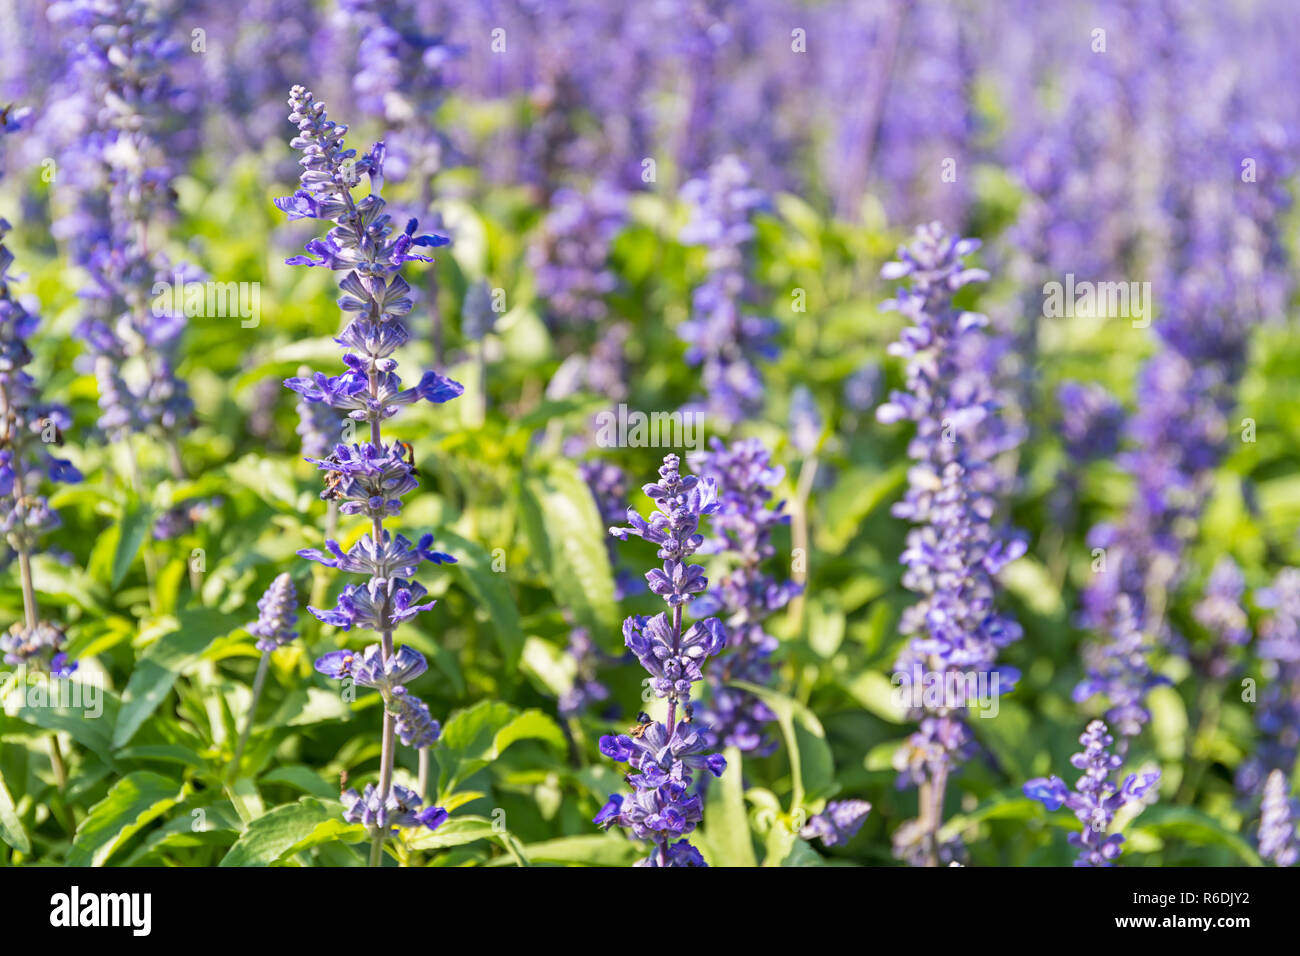 Blue Salvia flowers blooming in the garden Stock Photo